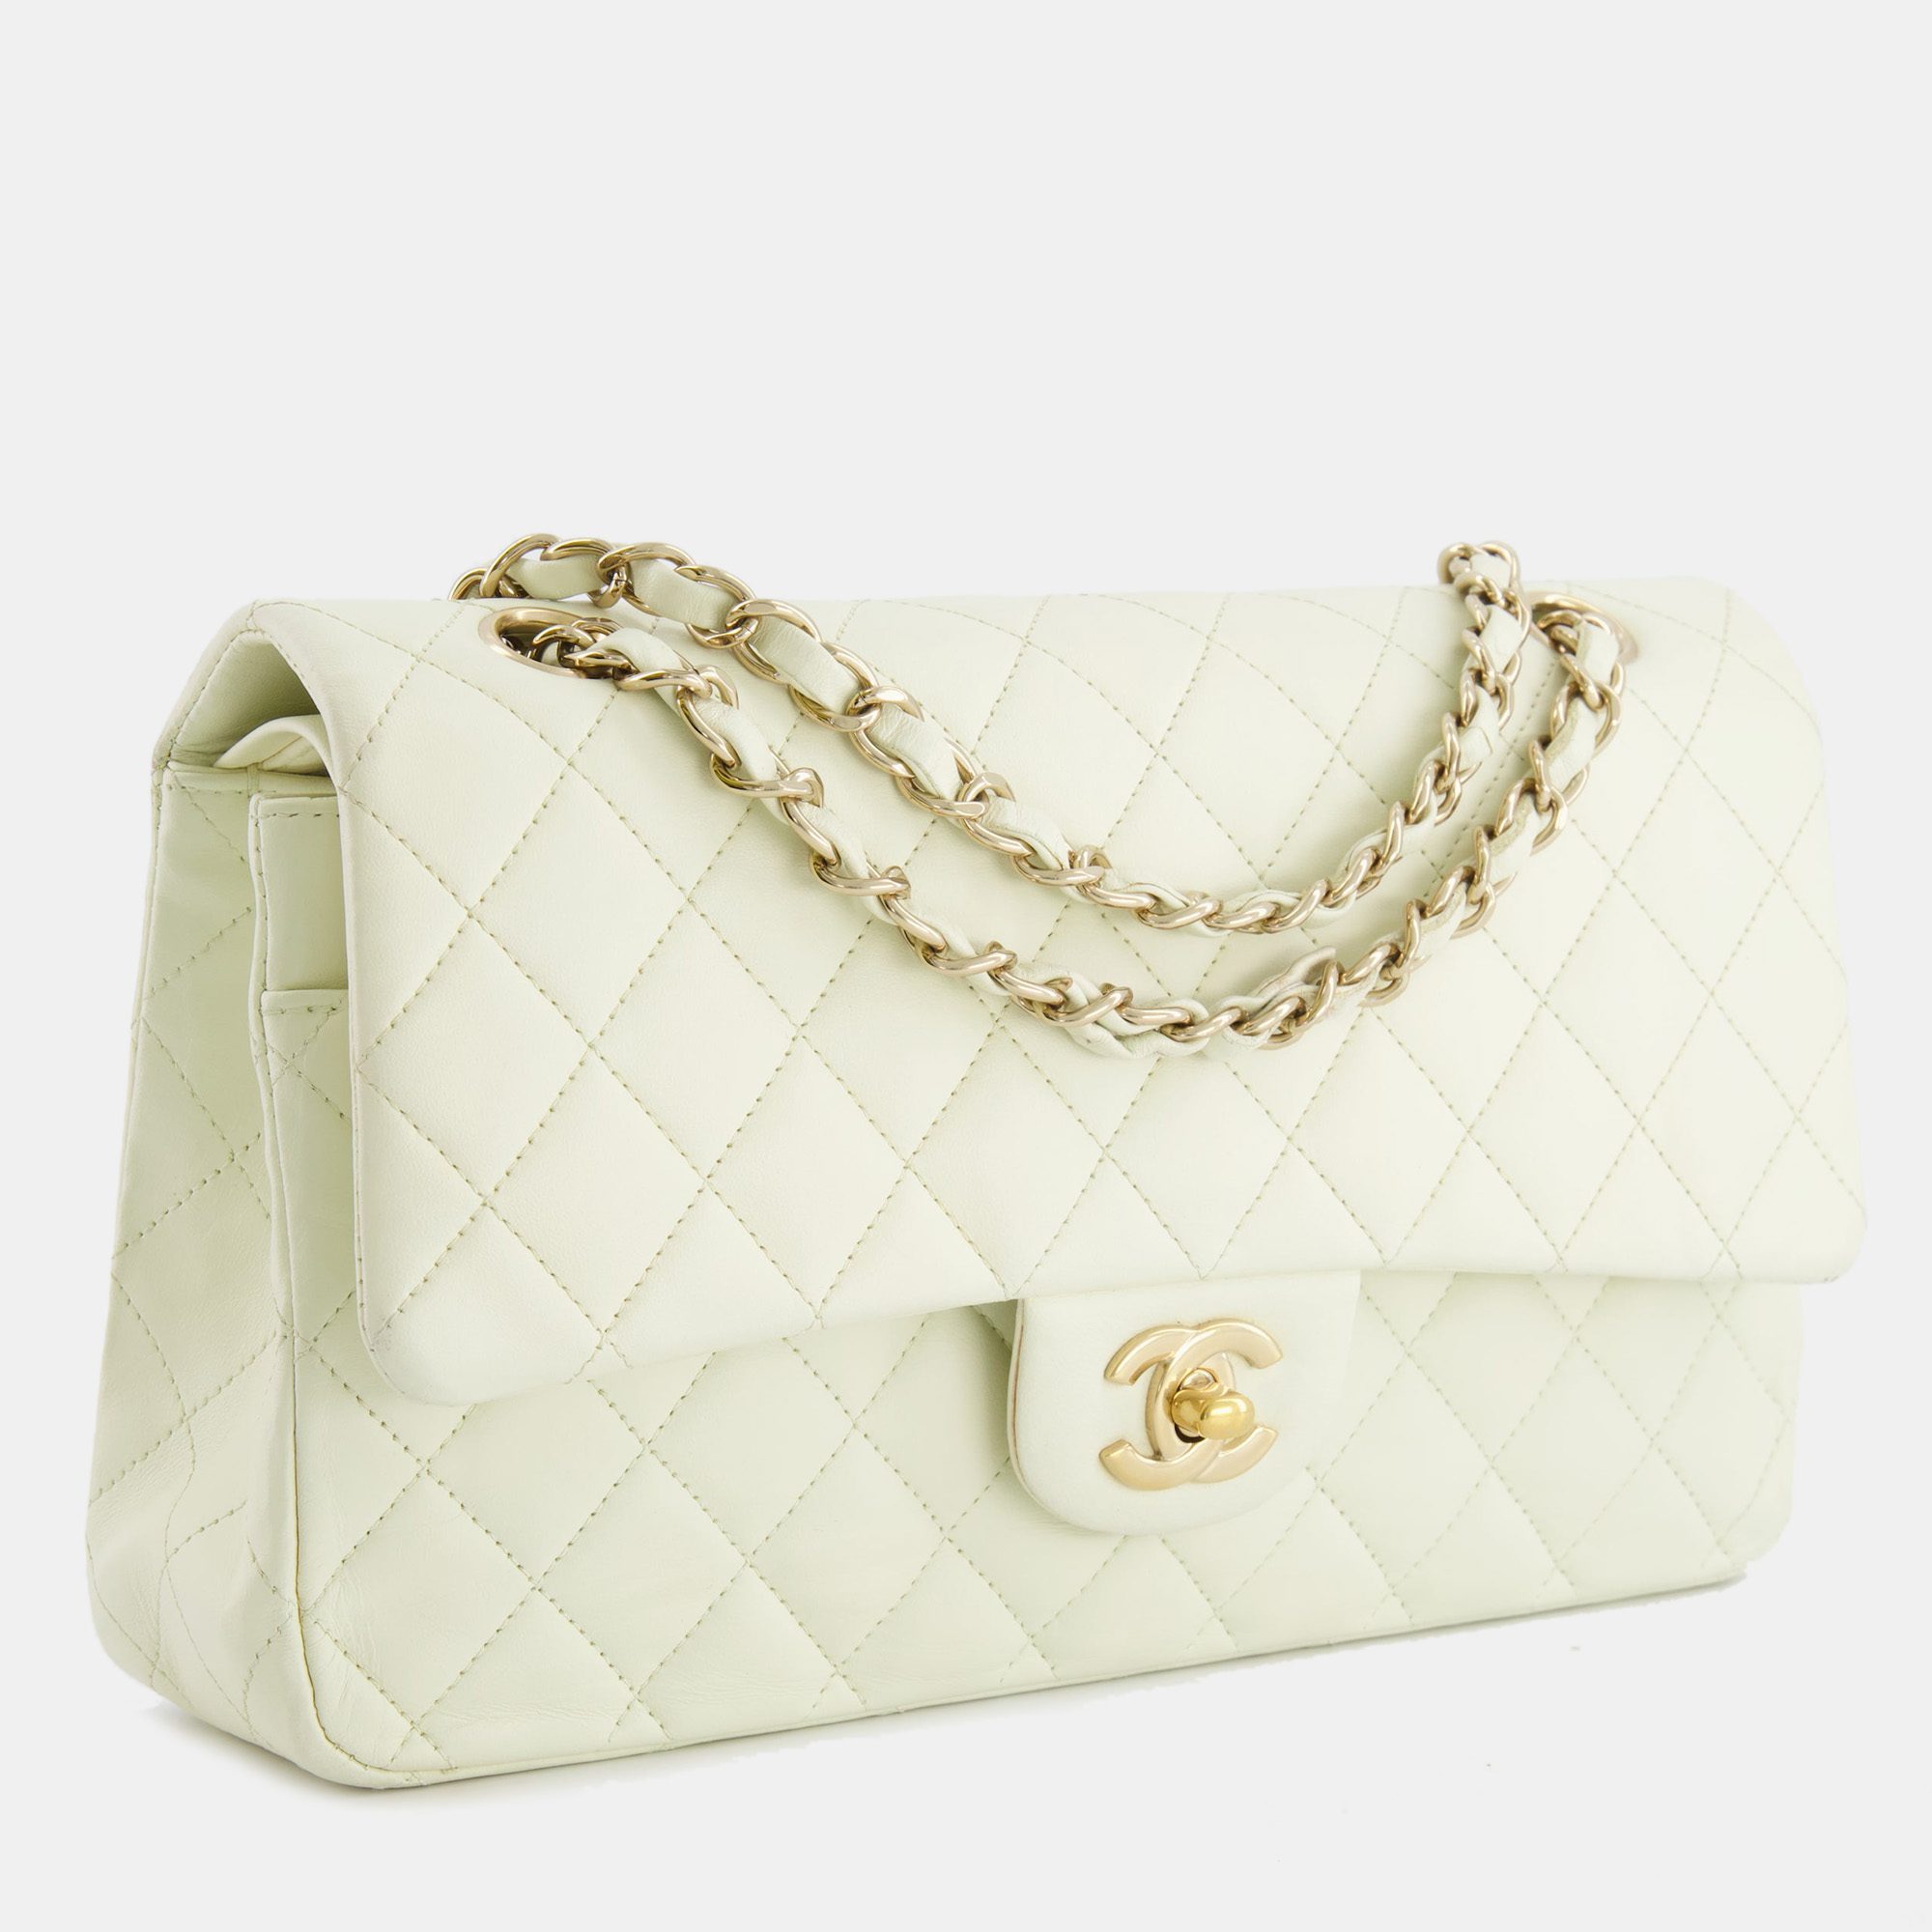 

Chanel White Medium Double Flap Bag in Lambskin Leather with Champagne Gold Hardware